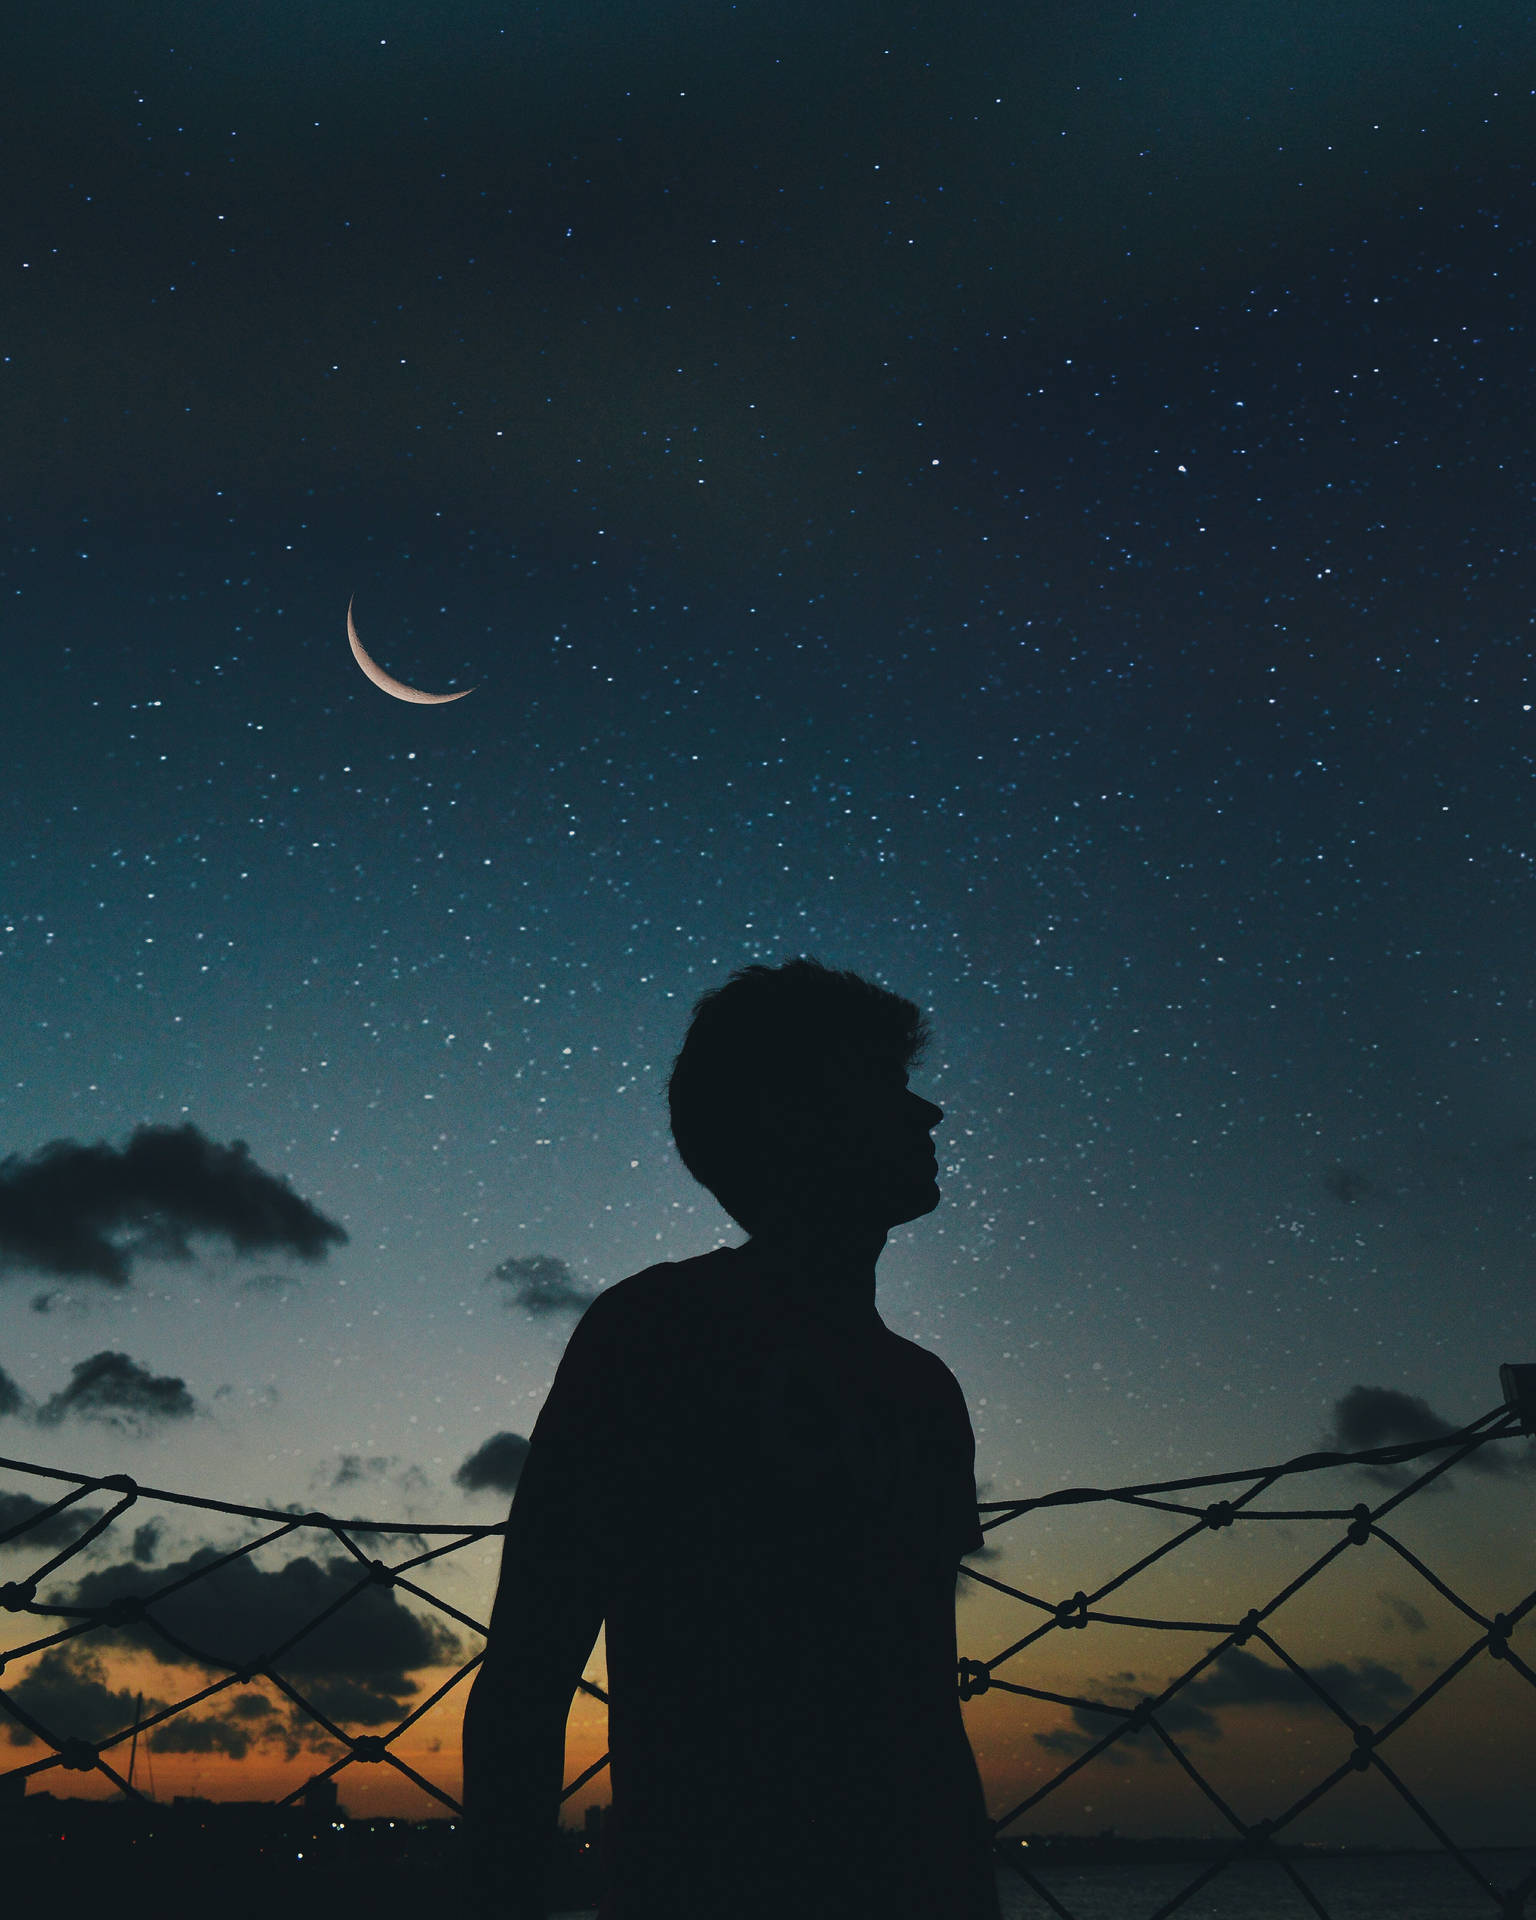 Man On Moon Pictures | Download Free Images on Unsplash